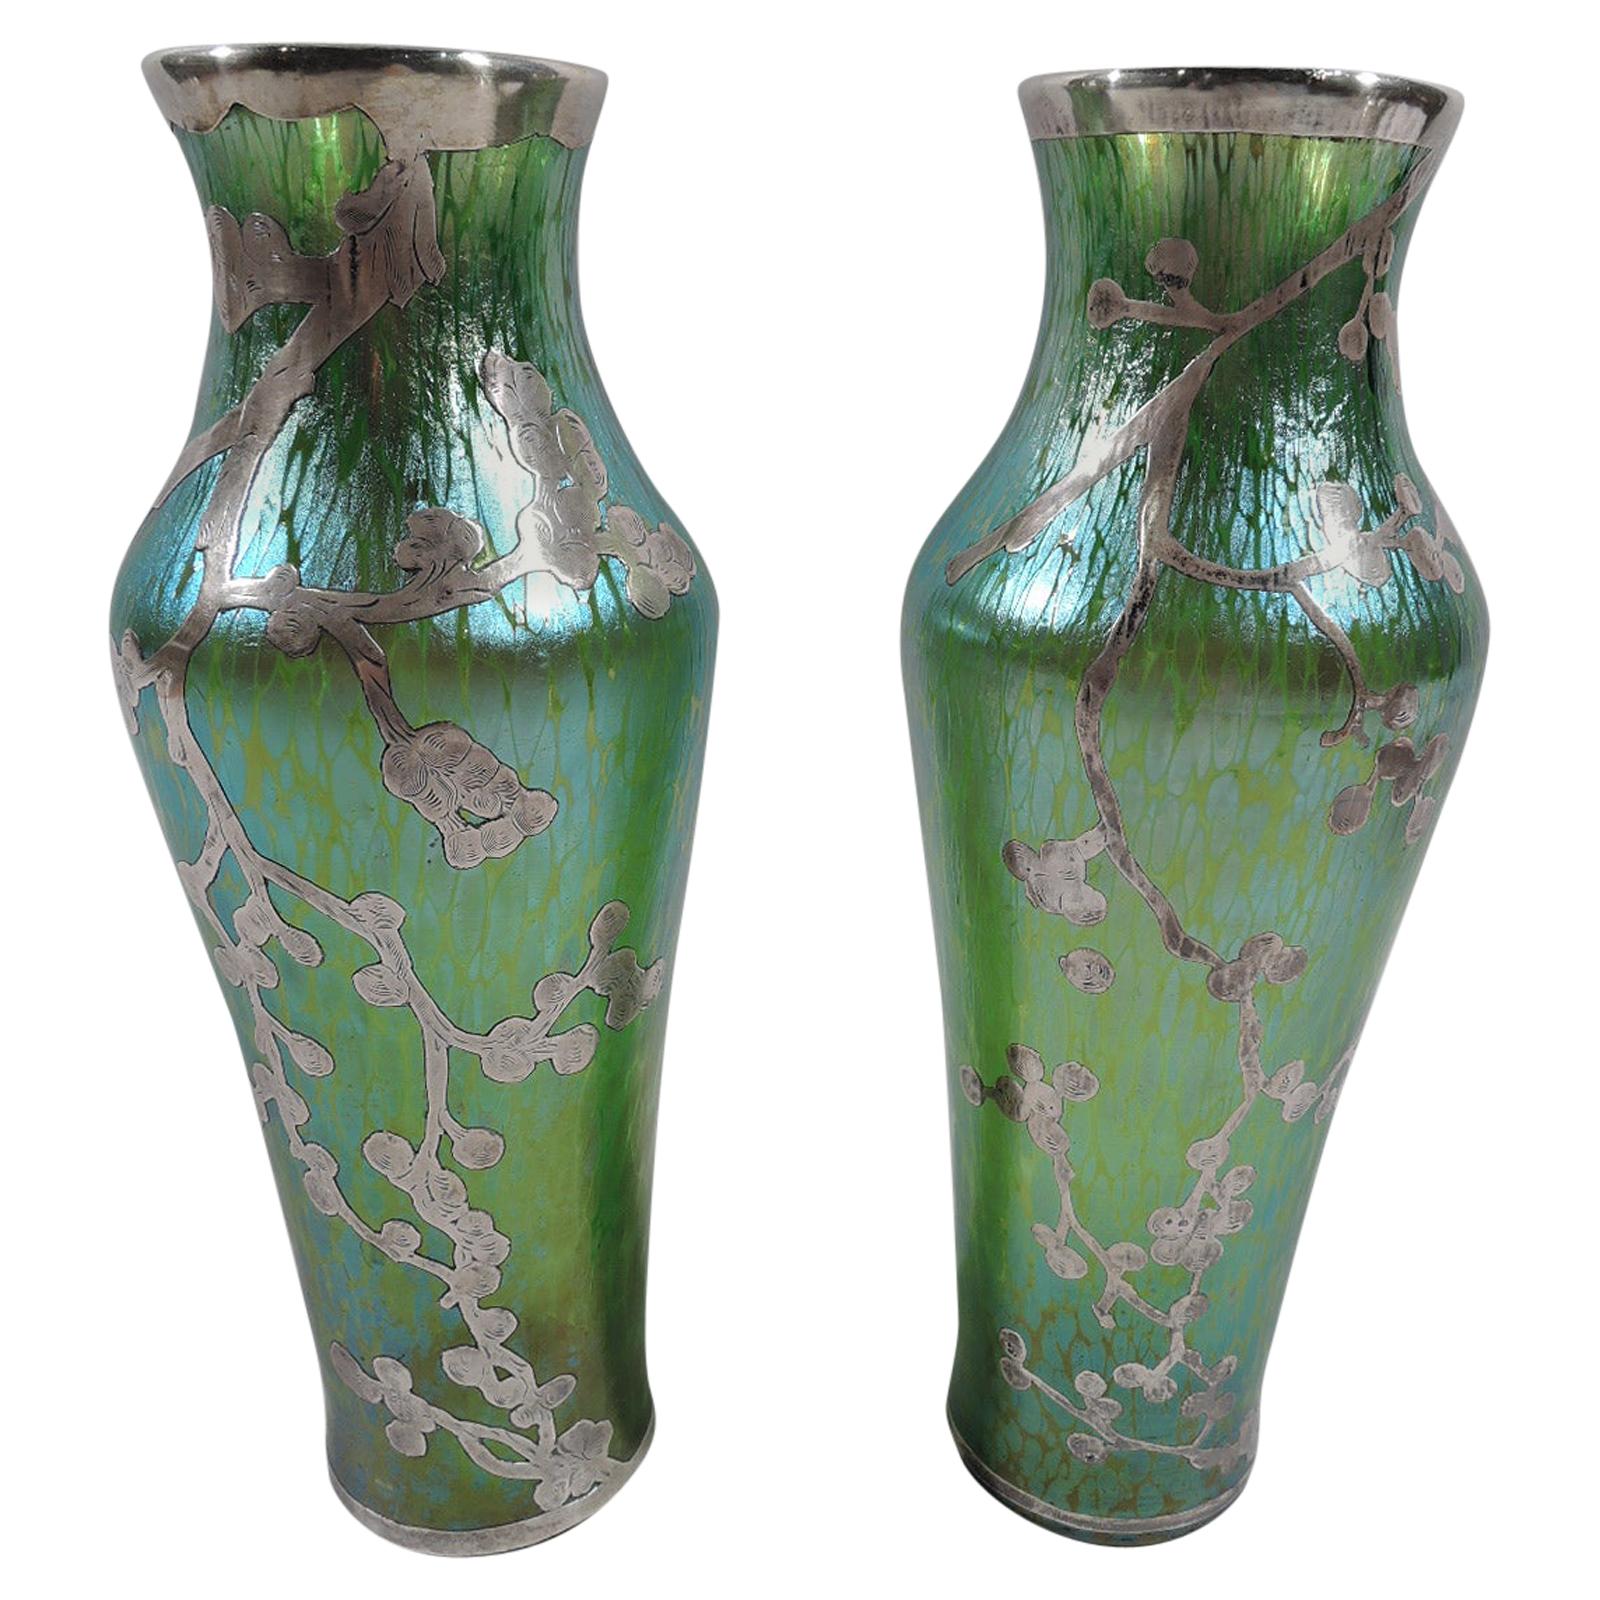 Pair of Loetz Green Art Glass Vases with Japonesque Silver Overlay